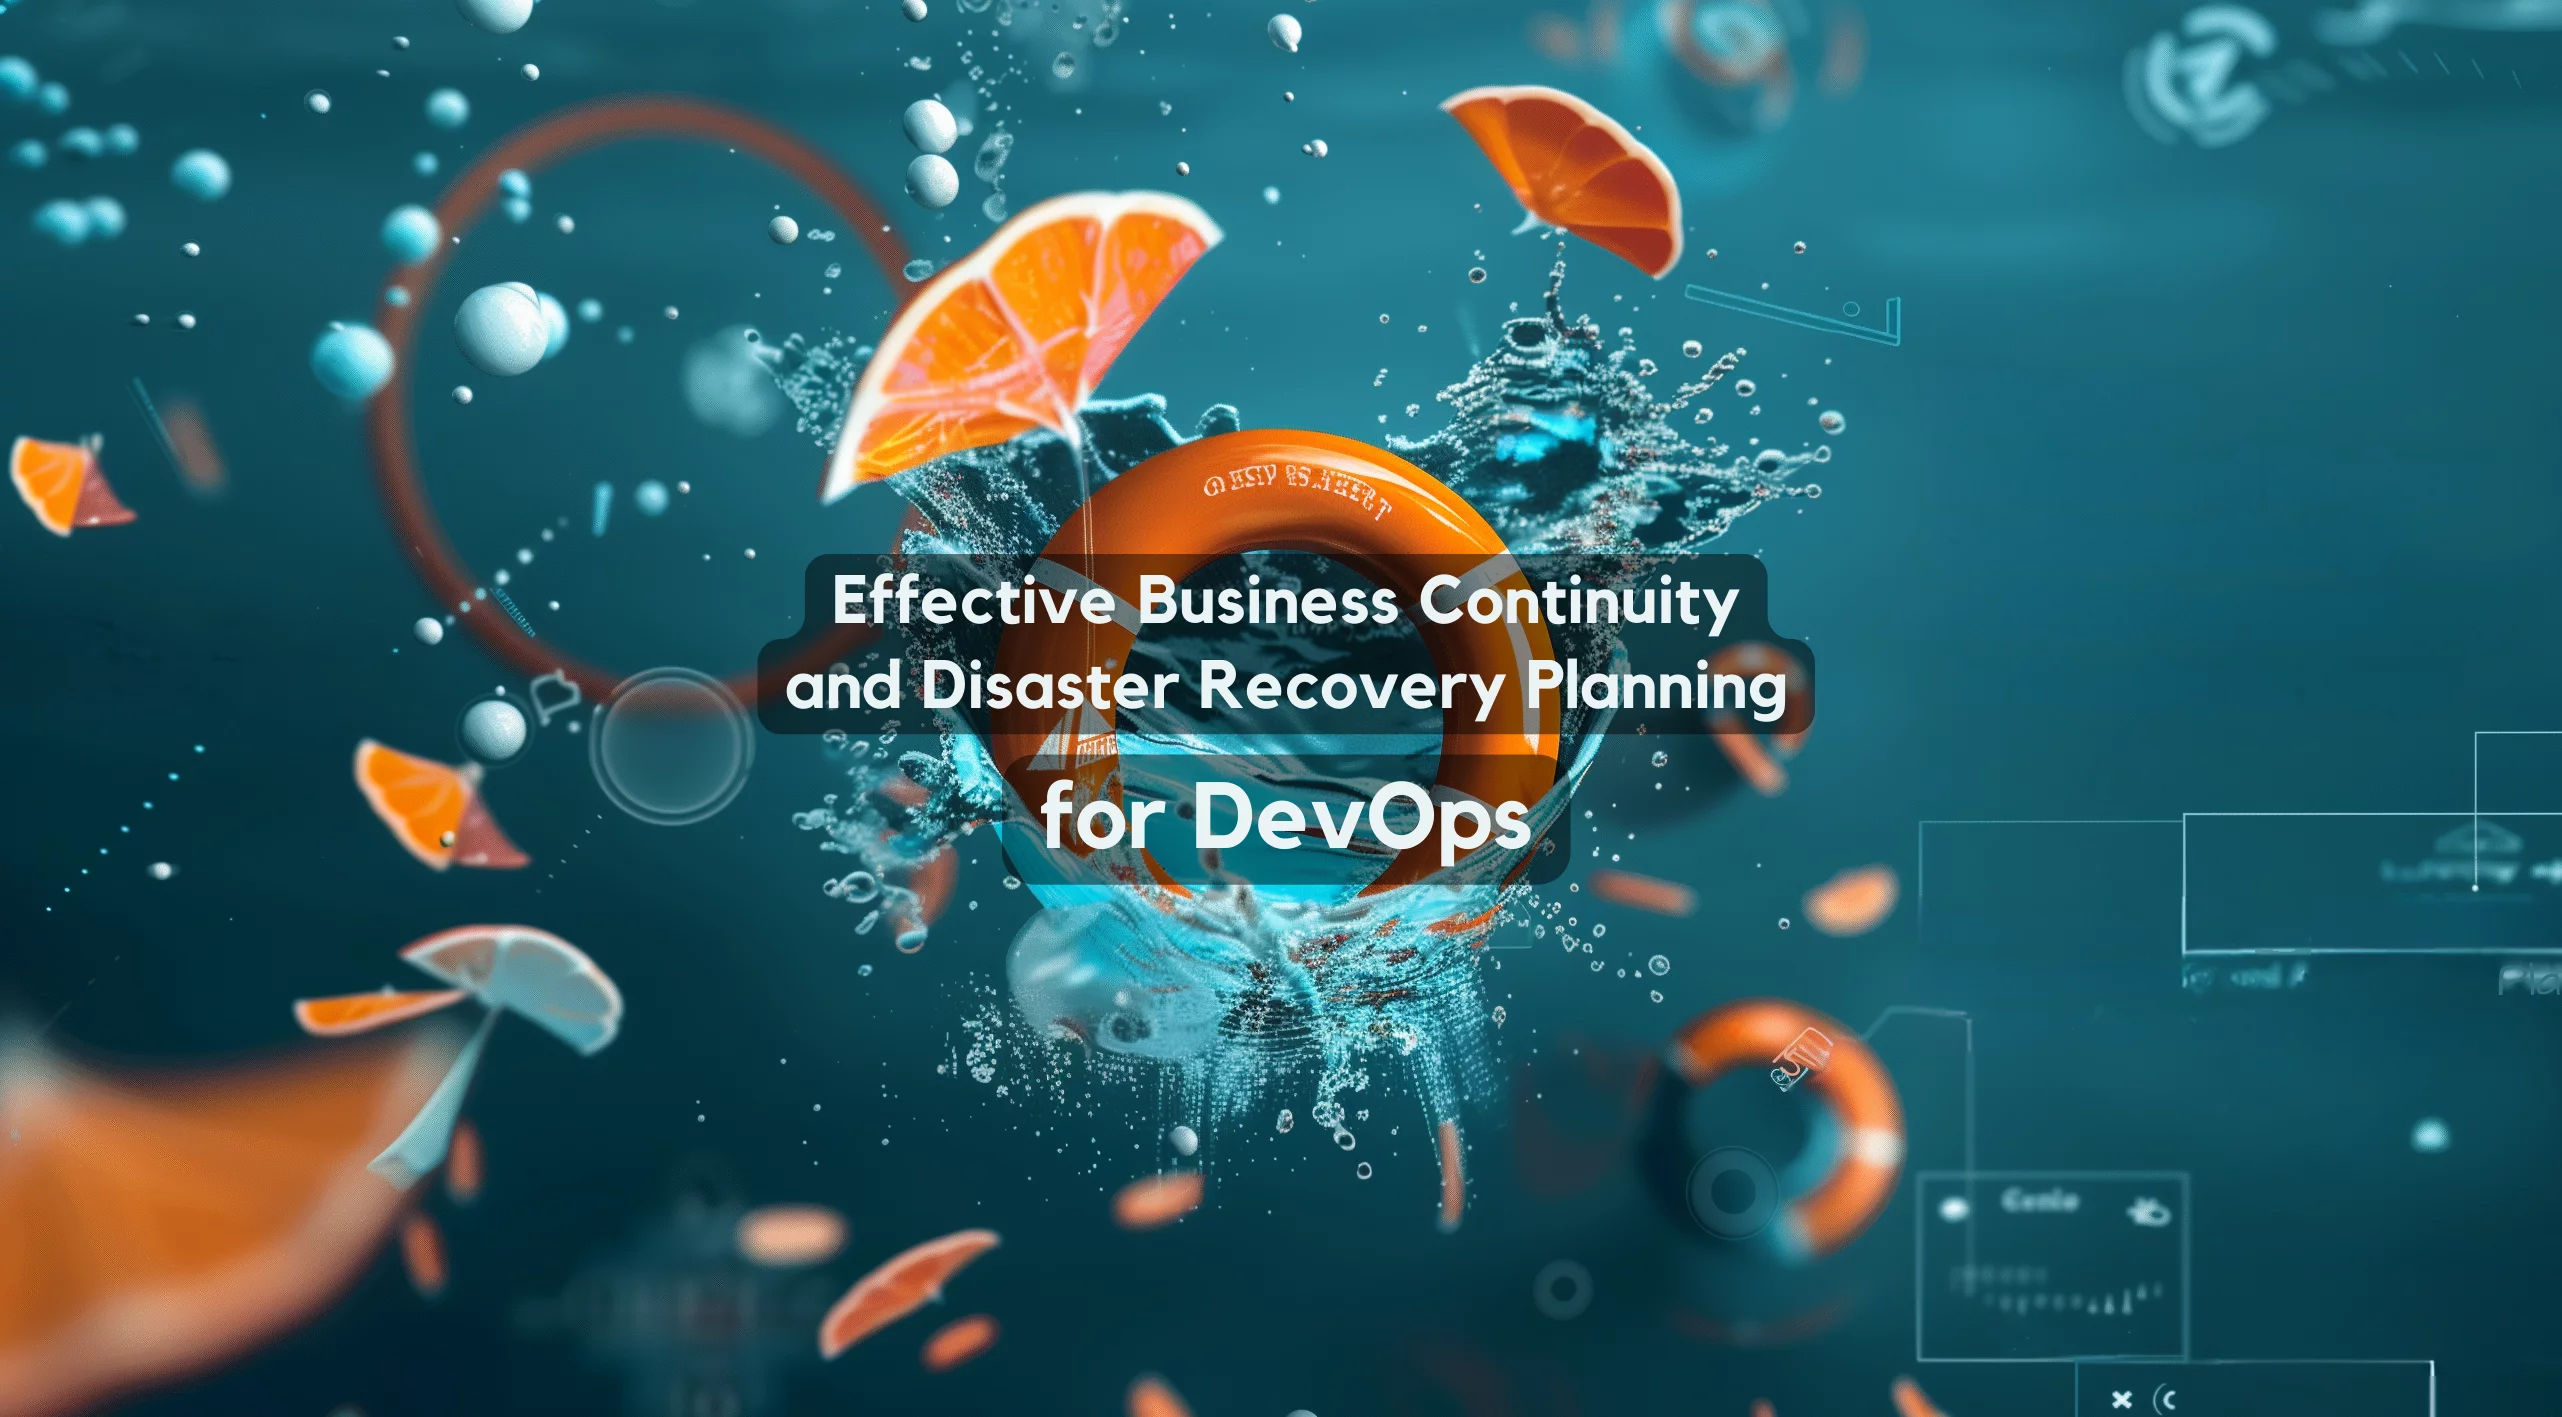 Effective Business Continuity and Disaster Recovery Planning for DevOps